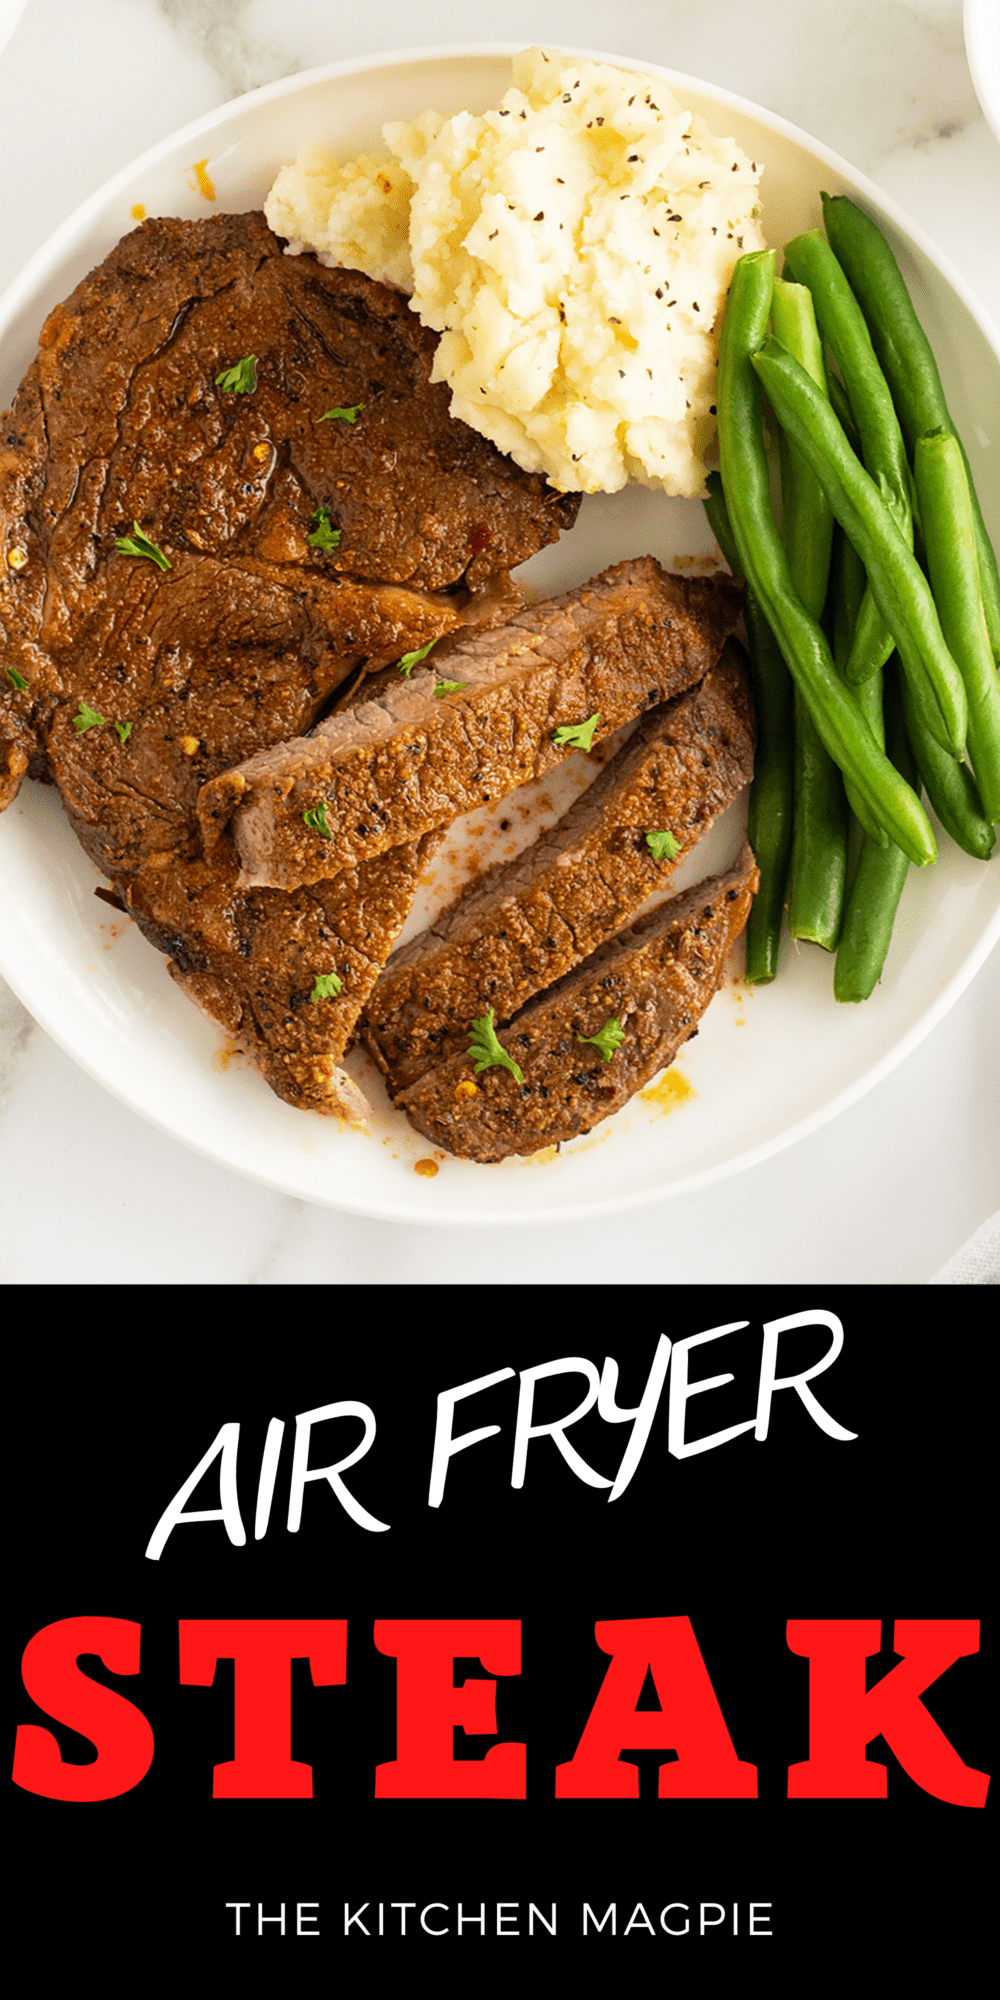 Thanks to your air fryer you can enjoy a tender and almost mess-free steak whenever you feel like it!